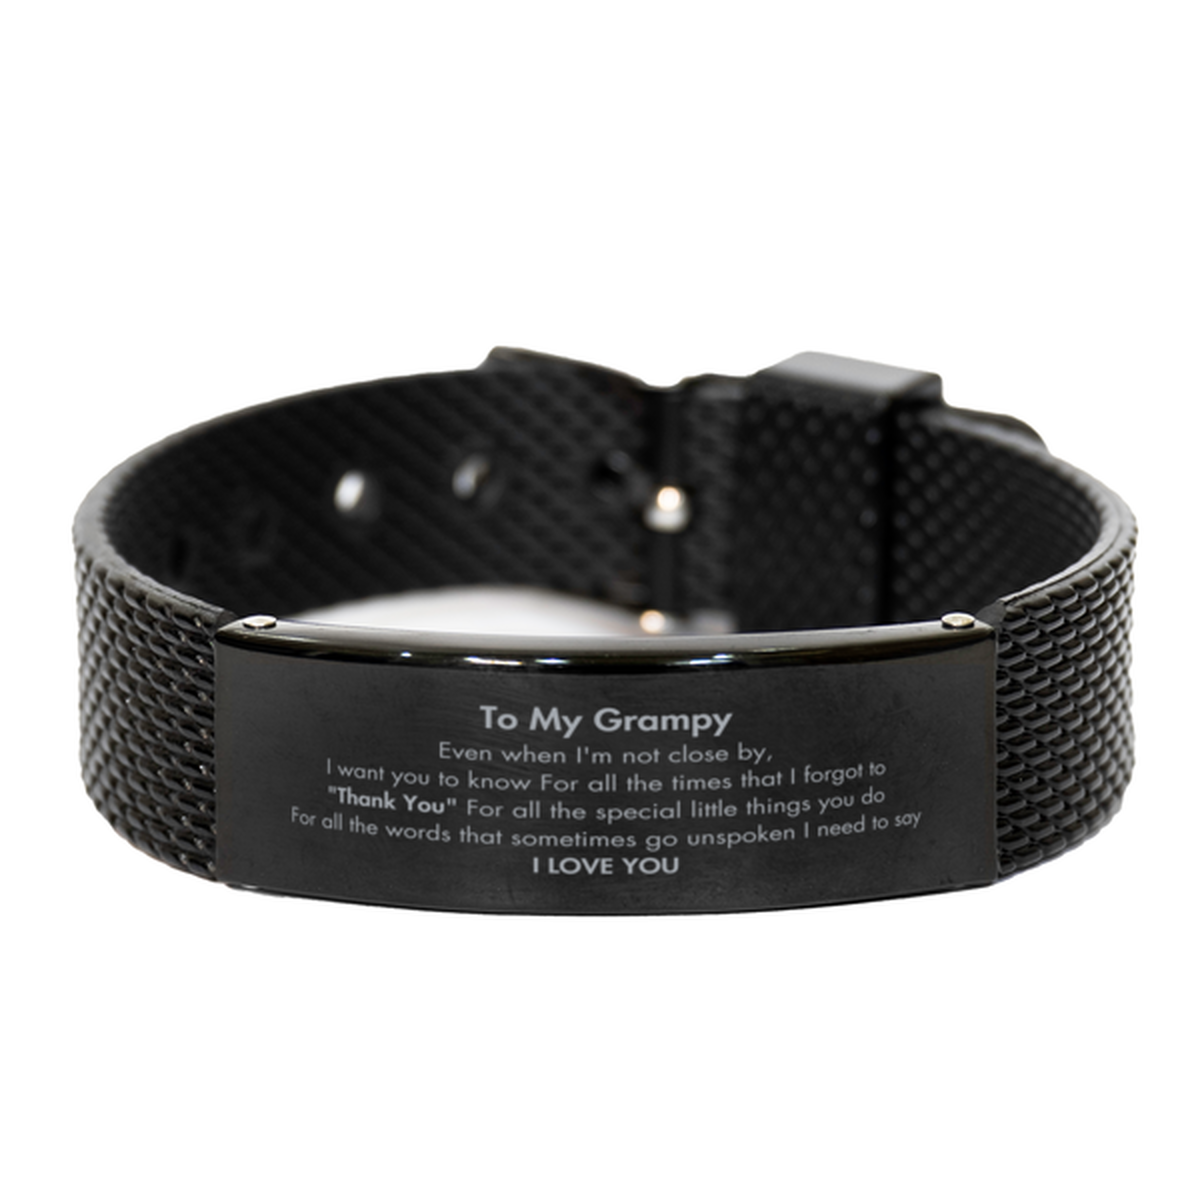 Thank You Gifts for Grampy, Keepsake Black Shark Mesh Bracelet Gifts for Grampy Birthday Mother's day Father's Day Grampy For all the words That sometimes go unspoken I need to say I LOVE YOU